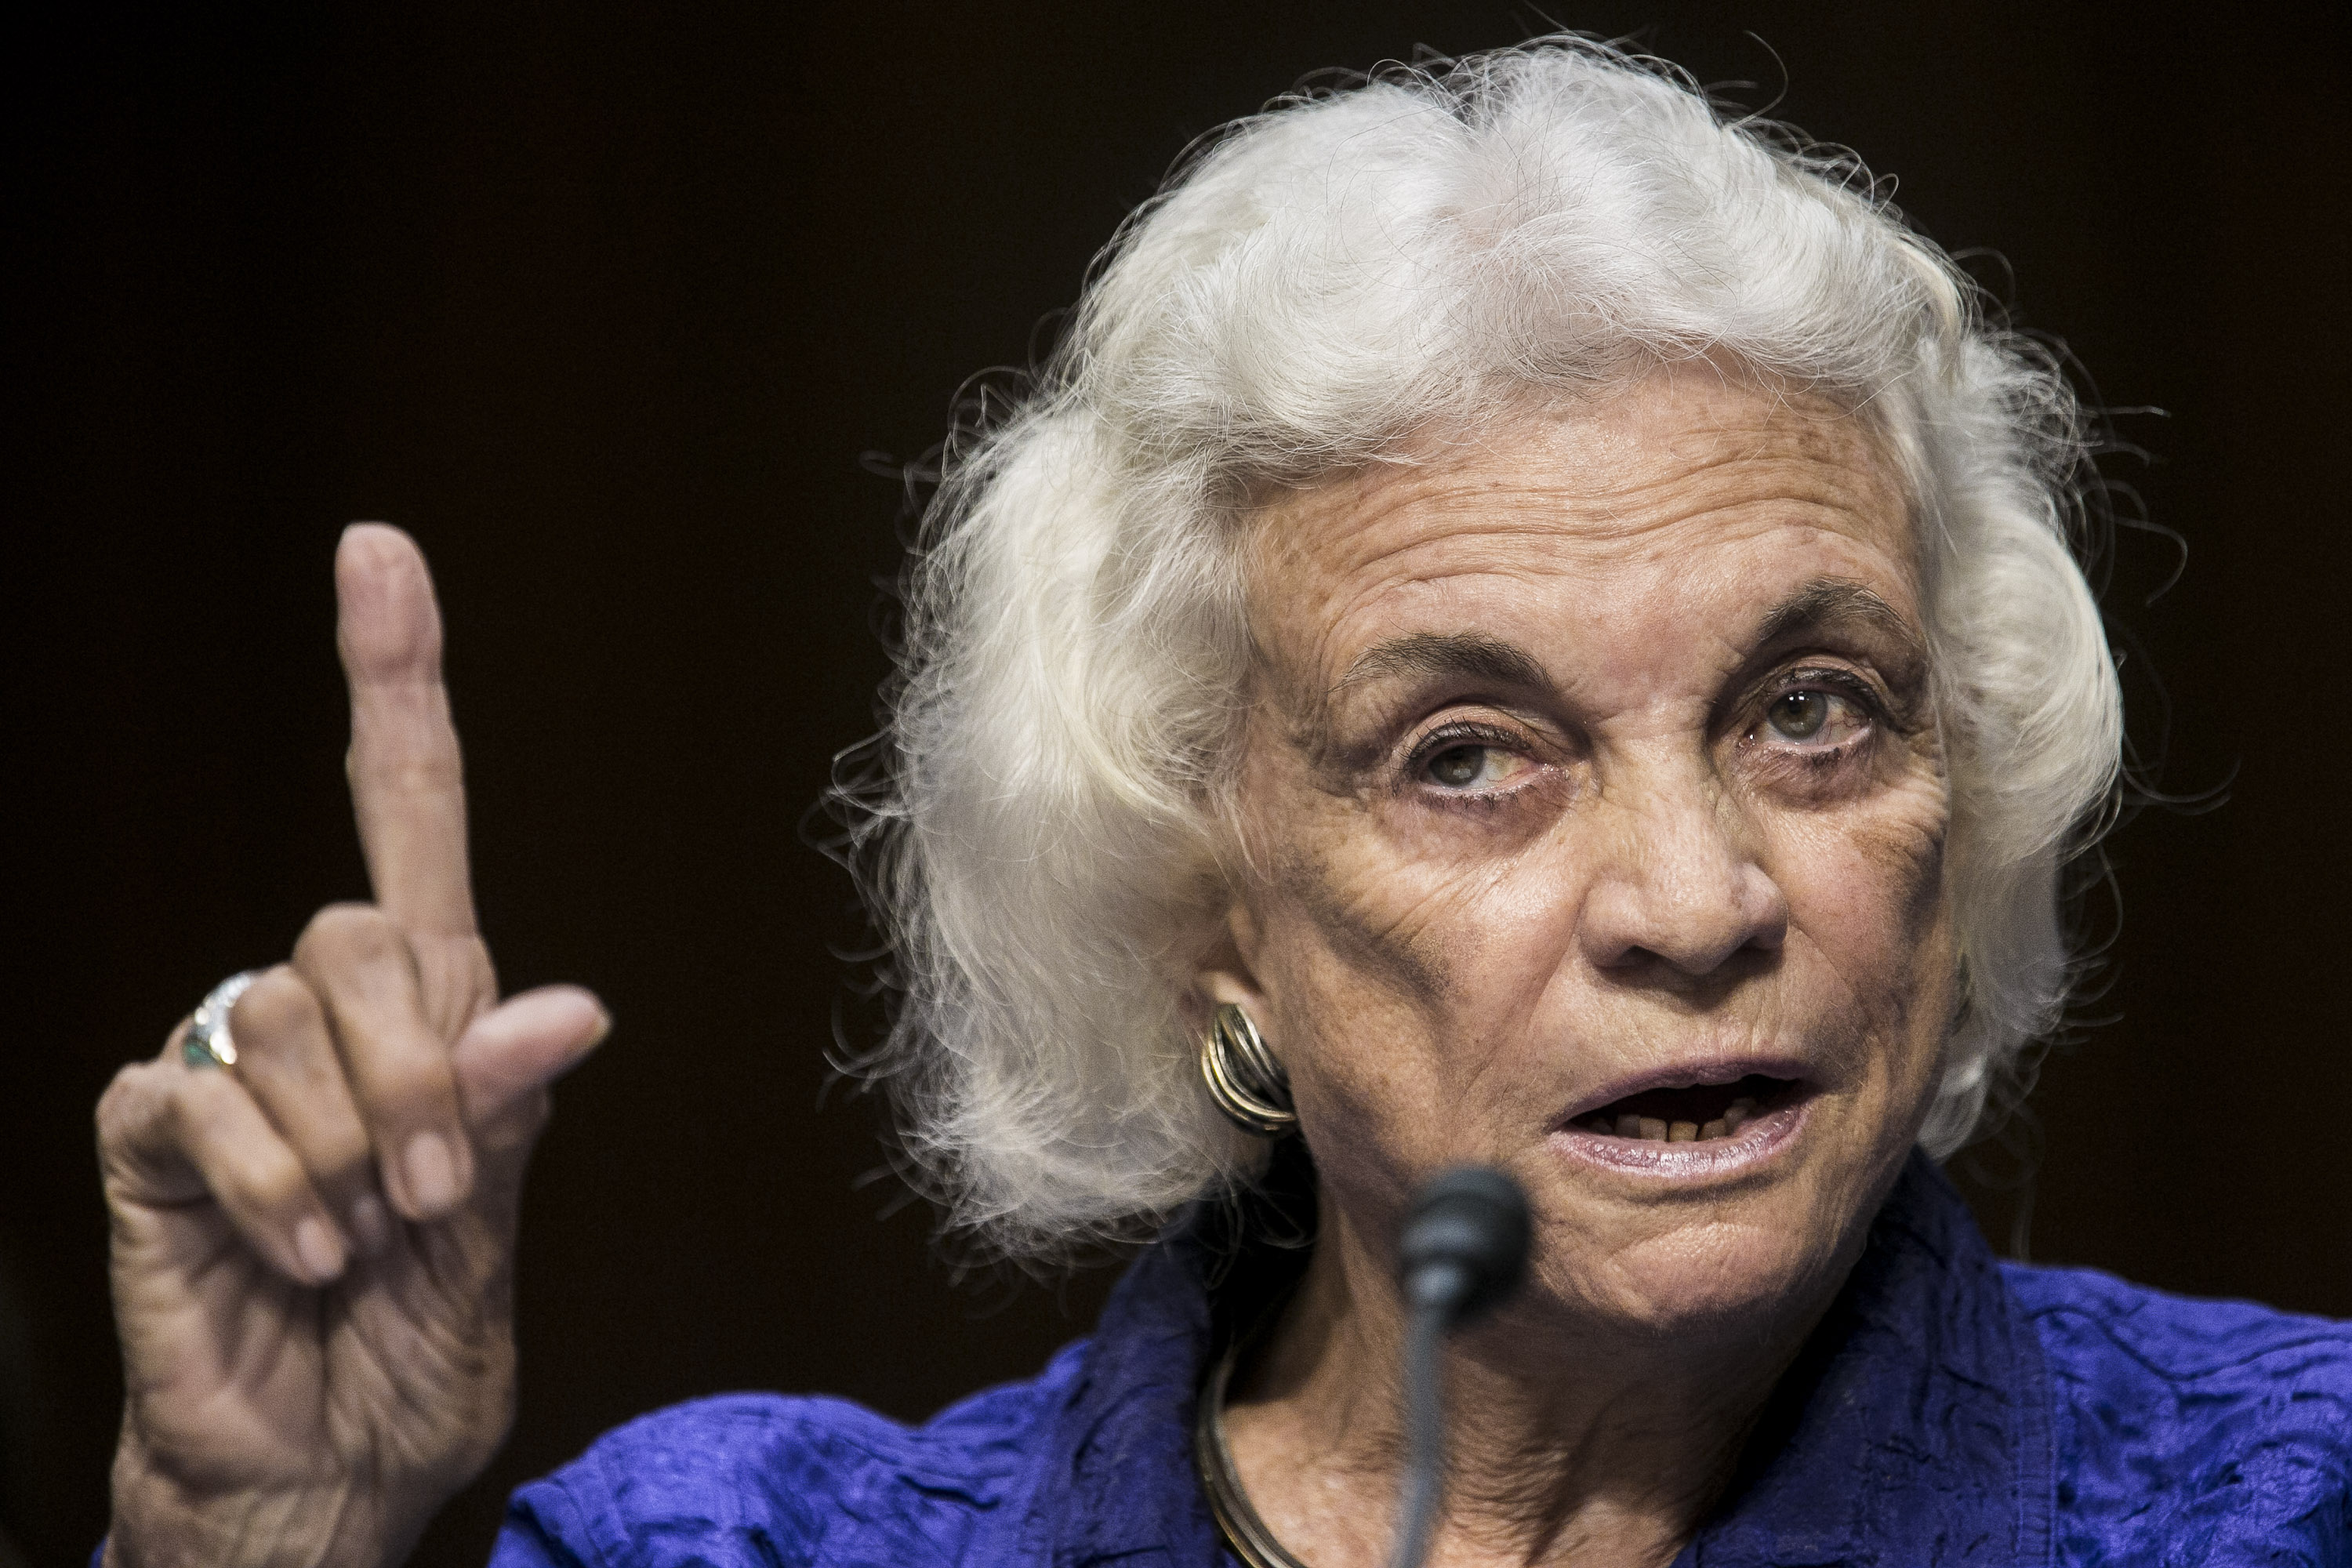 Former Supreme Court Justice Sandra Day O'Connor testifies before the Senate Judiciary Committee on July 25, 2012 in Washington, DC.  (T.J. Kirkpatrick--Getty Images) (T.J. Kirkpatrick&mdash;Getty Images)